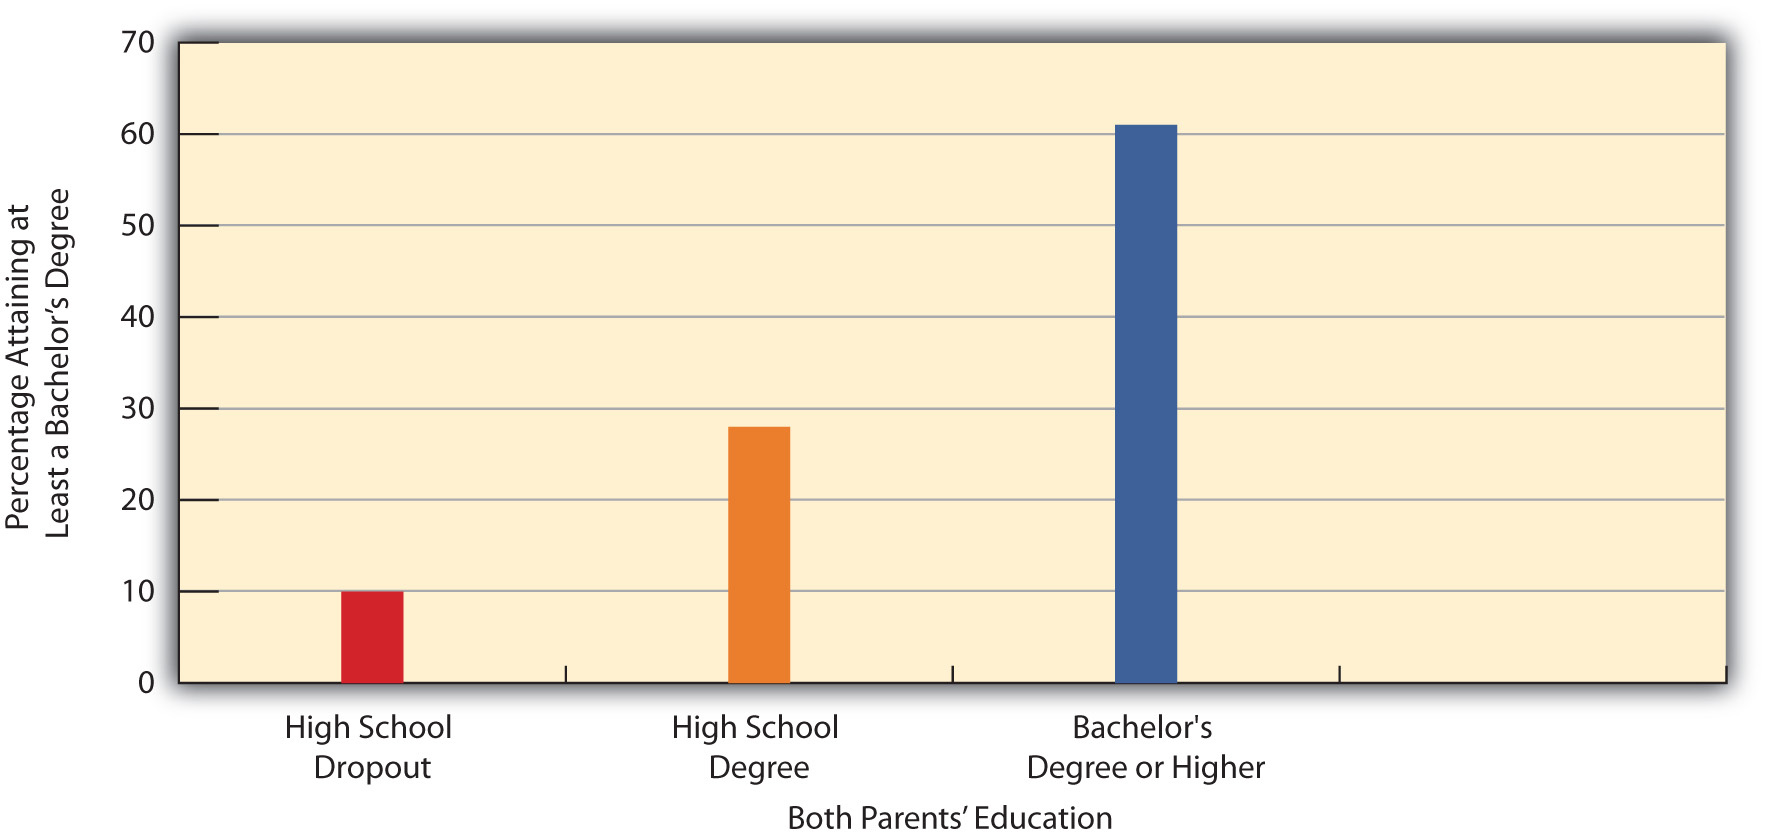 Parents' Education and Percentage of Respondents Who Have a College Degree